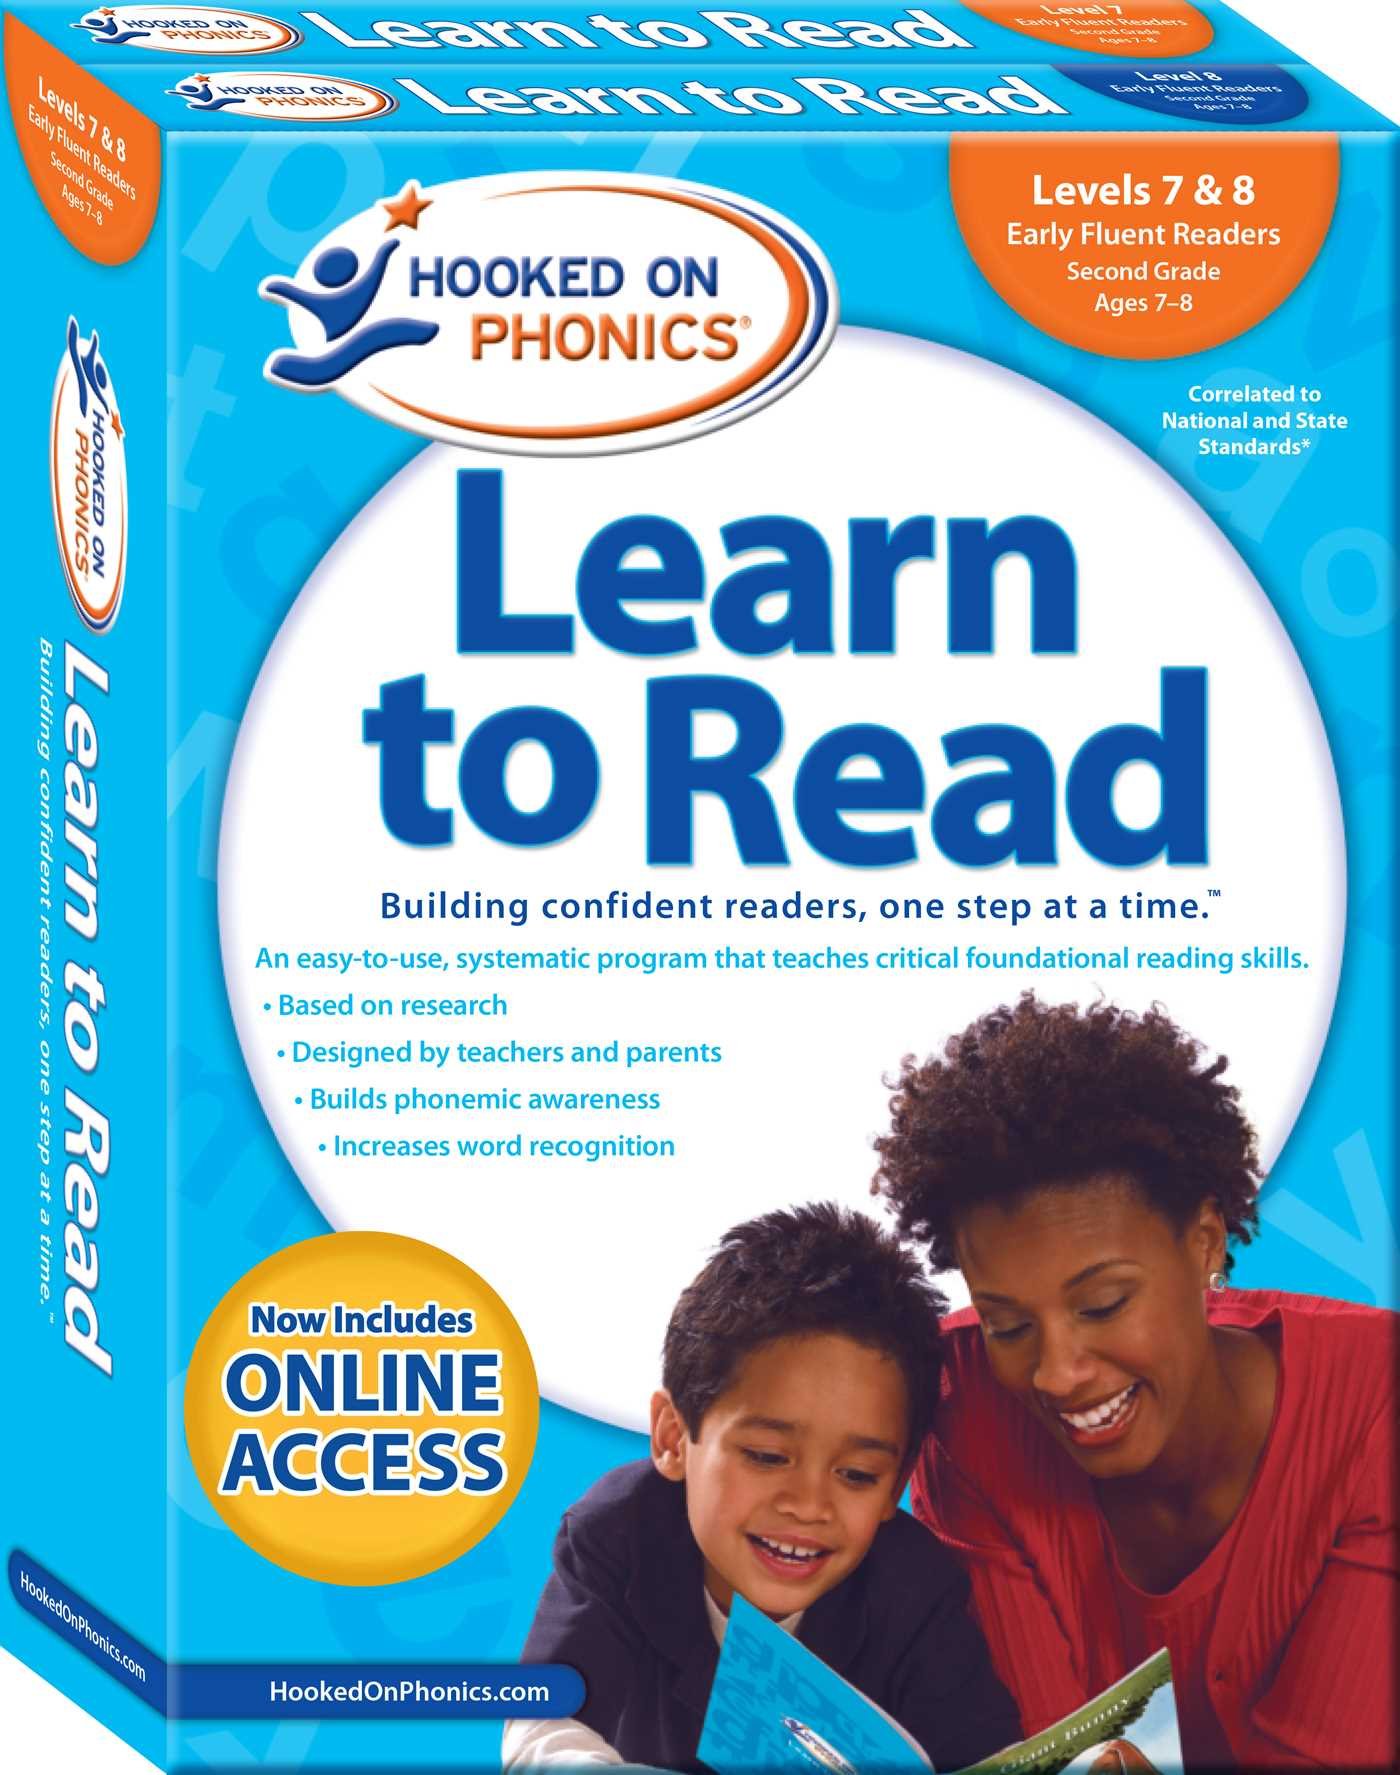 Mua Hooked On Phonics Learn To Read - Levels 7&8 Complete: Early Fluent  Readers (Second Grade | Ages 7-8) (4) (Learn To Read Complete Sets) Trên  Amazon Mỹ Chính Hãng 2023 | Giaonhan247